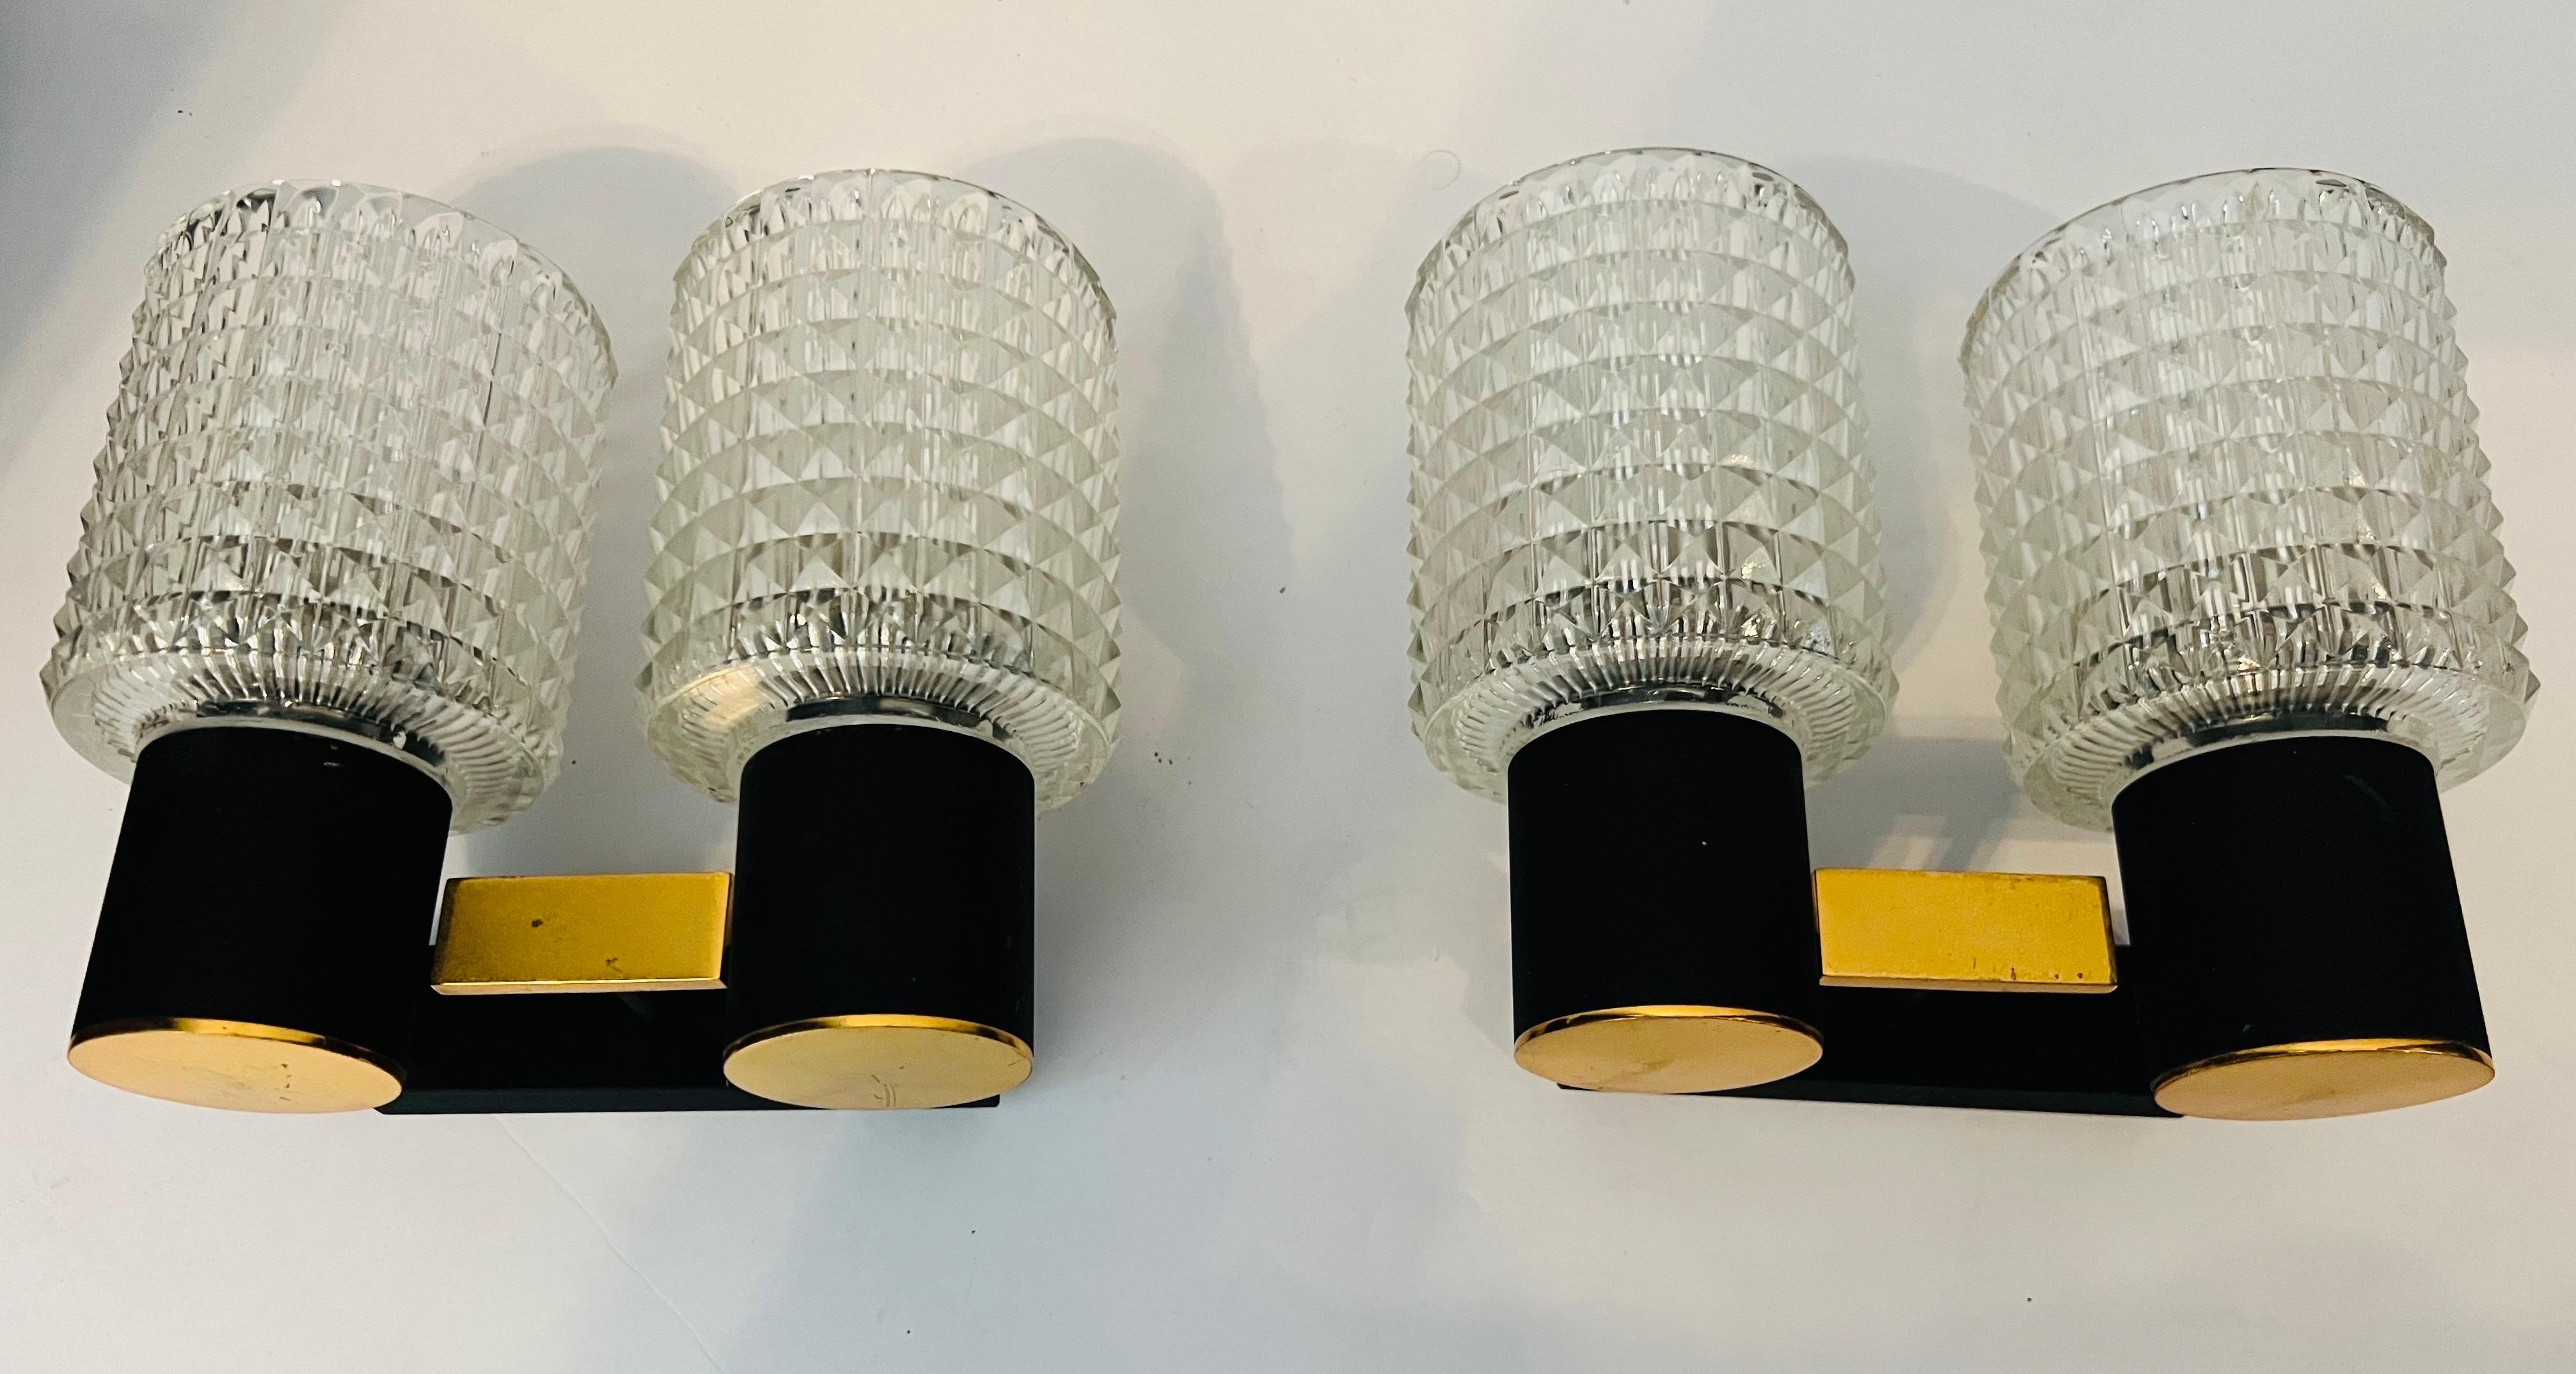 An original pair of French 1960s sconces composed of golden polished brass and black enamel fixtures with cut crystal glass shades. Made by the lighting company Lunel. Rewired with two candelabra sockets each.